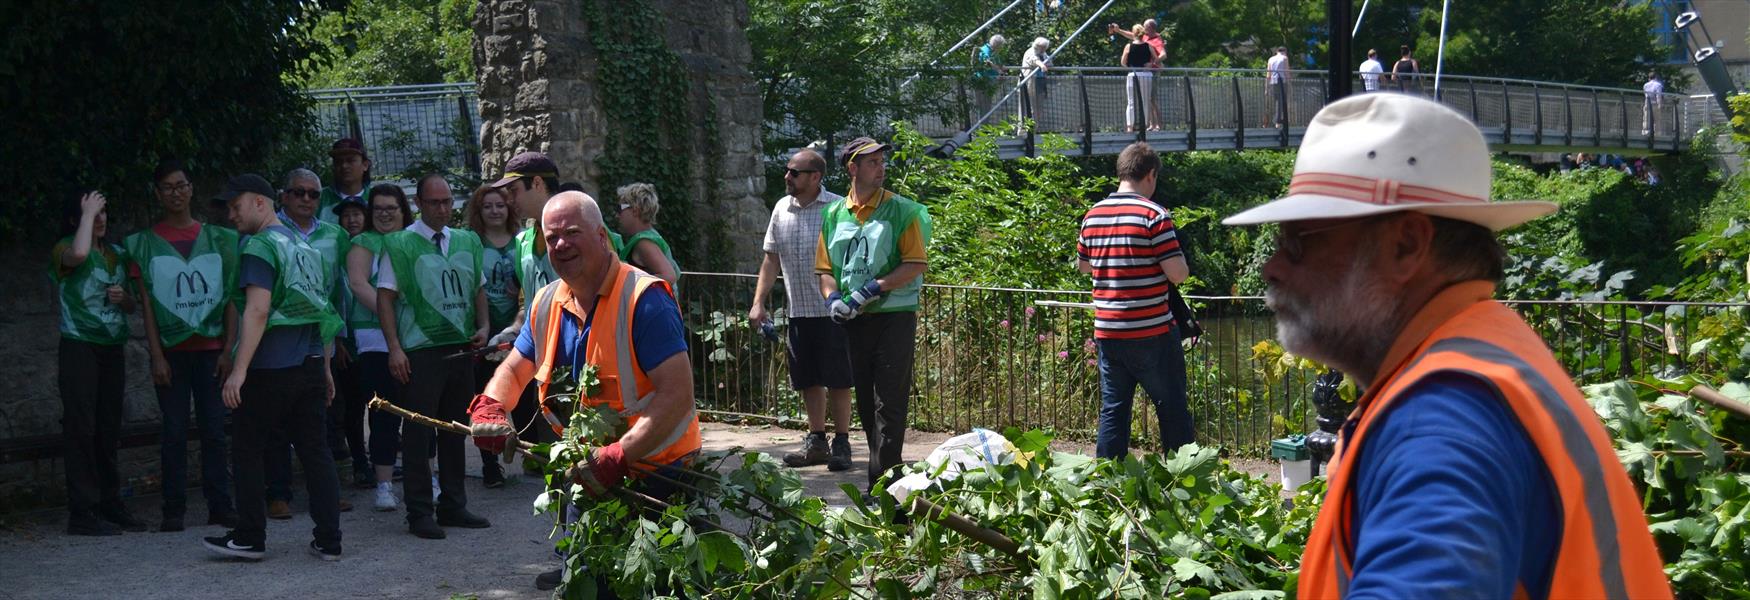 Maidstone River Park Partnership organise a clear up with volunteers